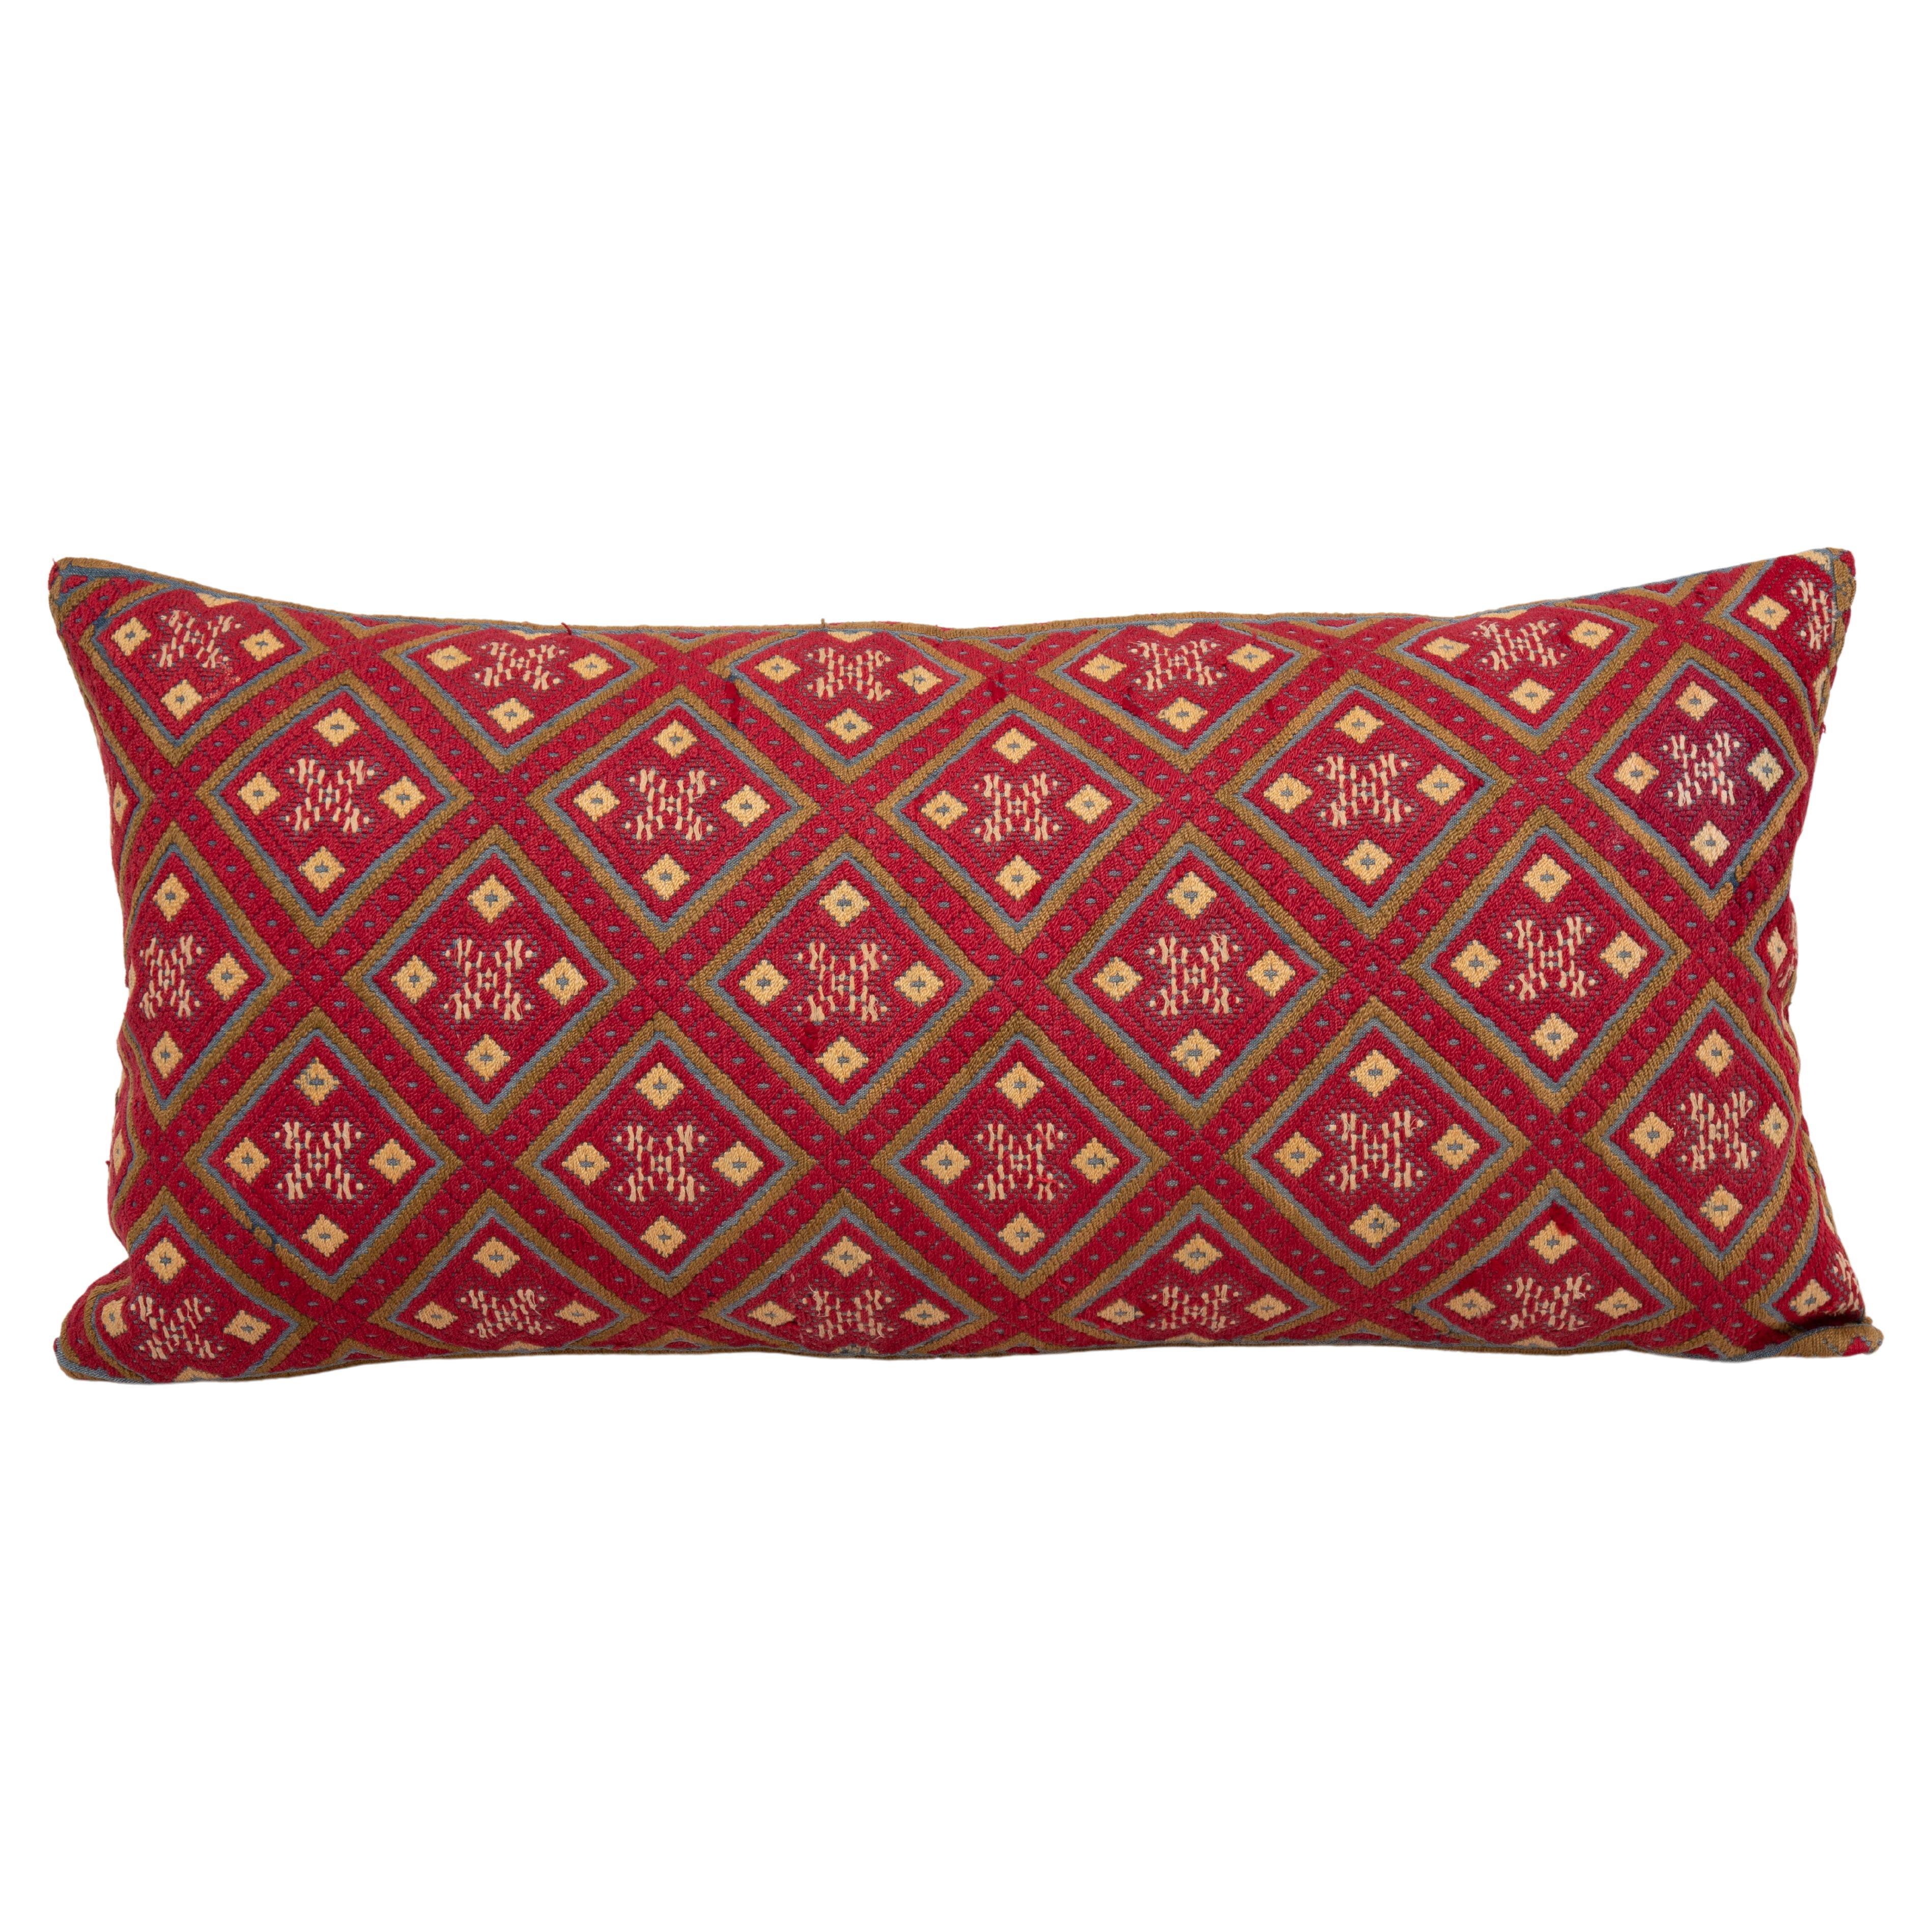 Pillowcase Made from an Antique Eastern European Embroidered Panel For Sale